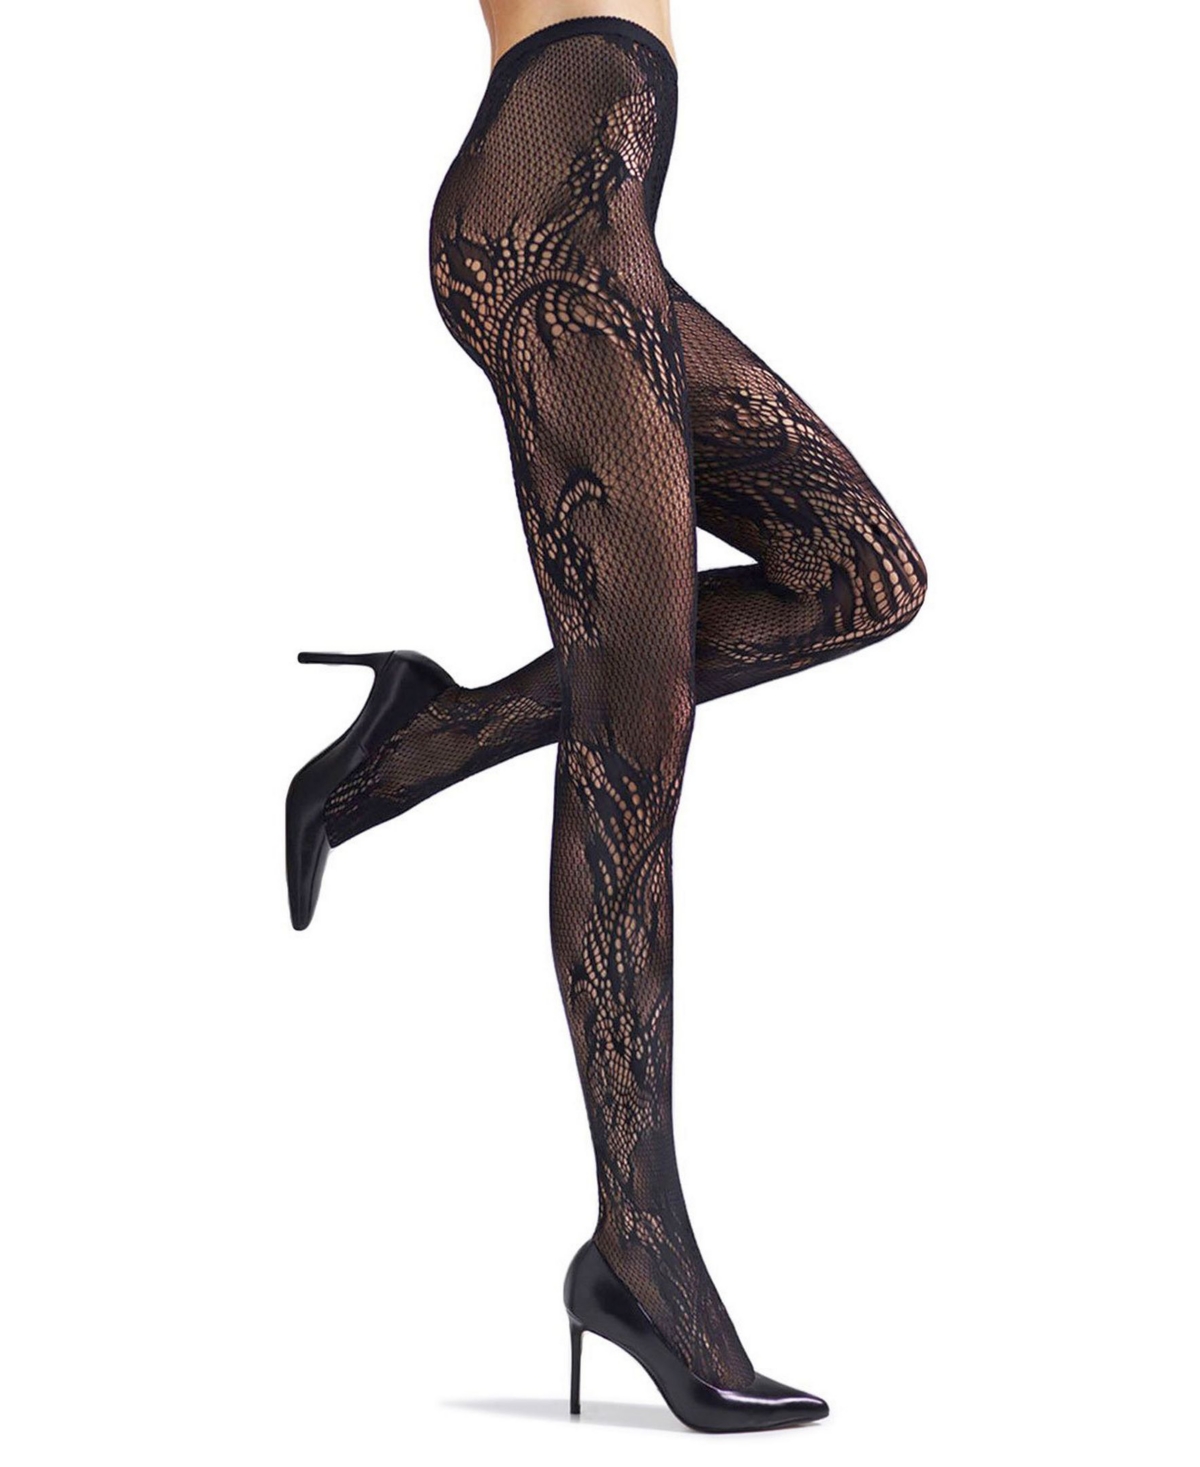 Women's Feather Lace Net Tights - Black